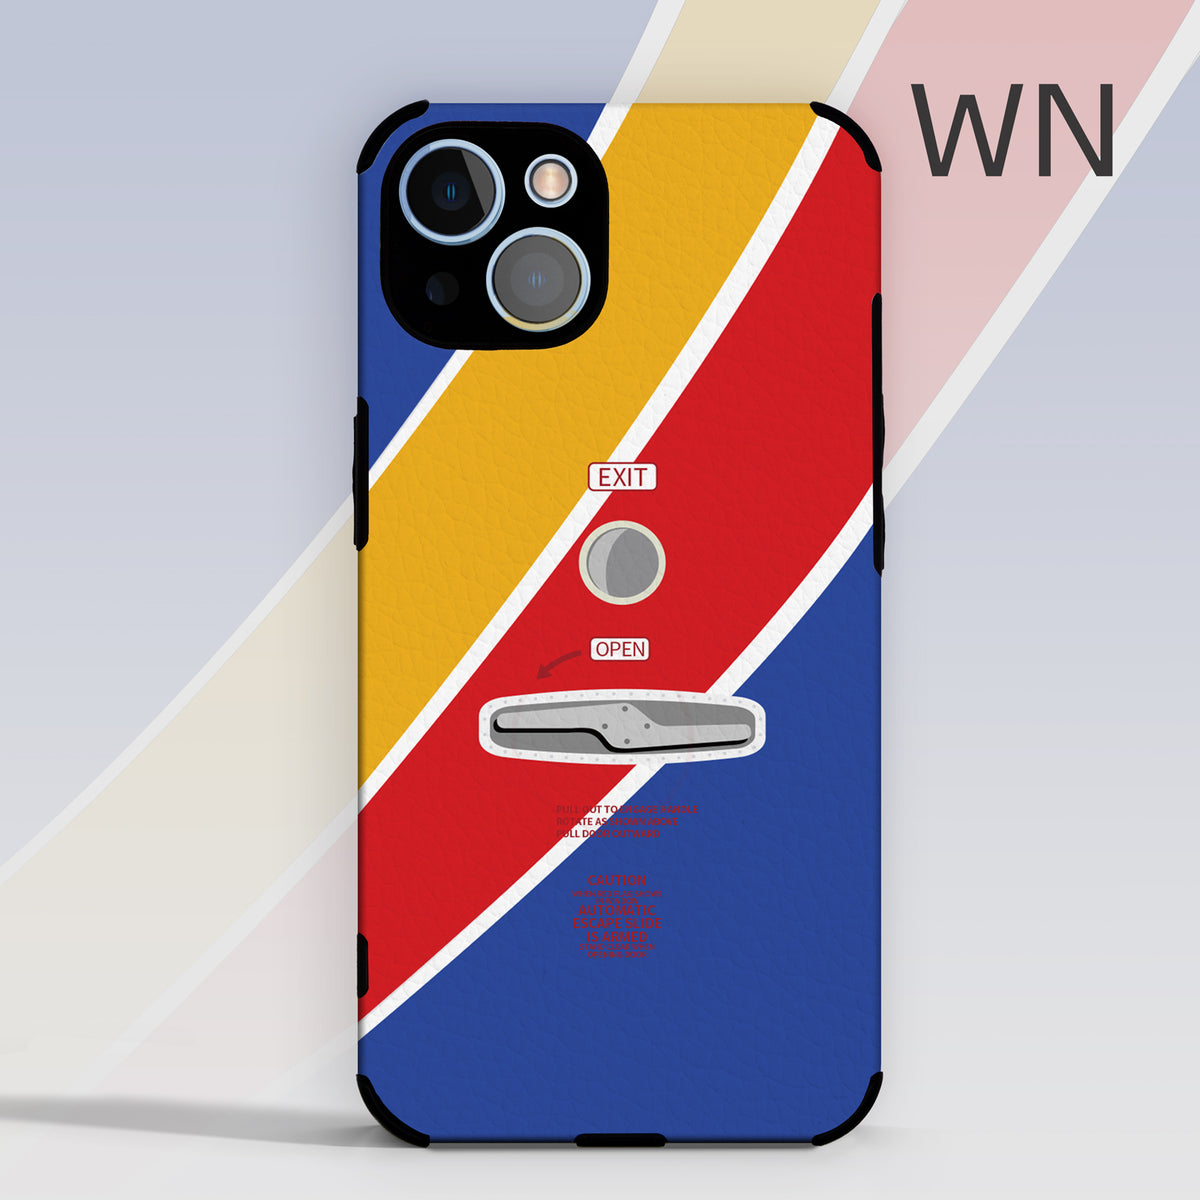 Southwest Airlines WN Phone Case Best aviation gift pilot iPhone Andriod Apple Samsung Huawei